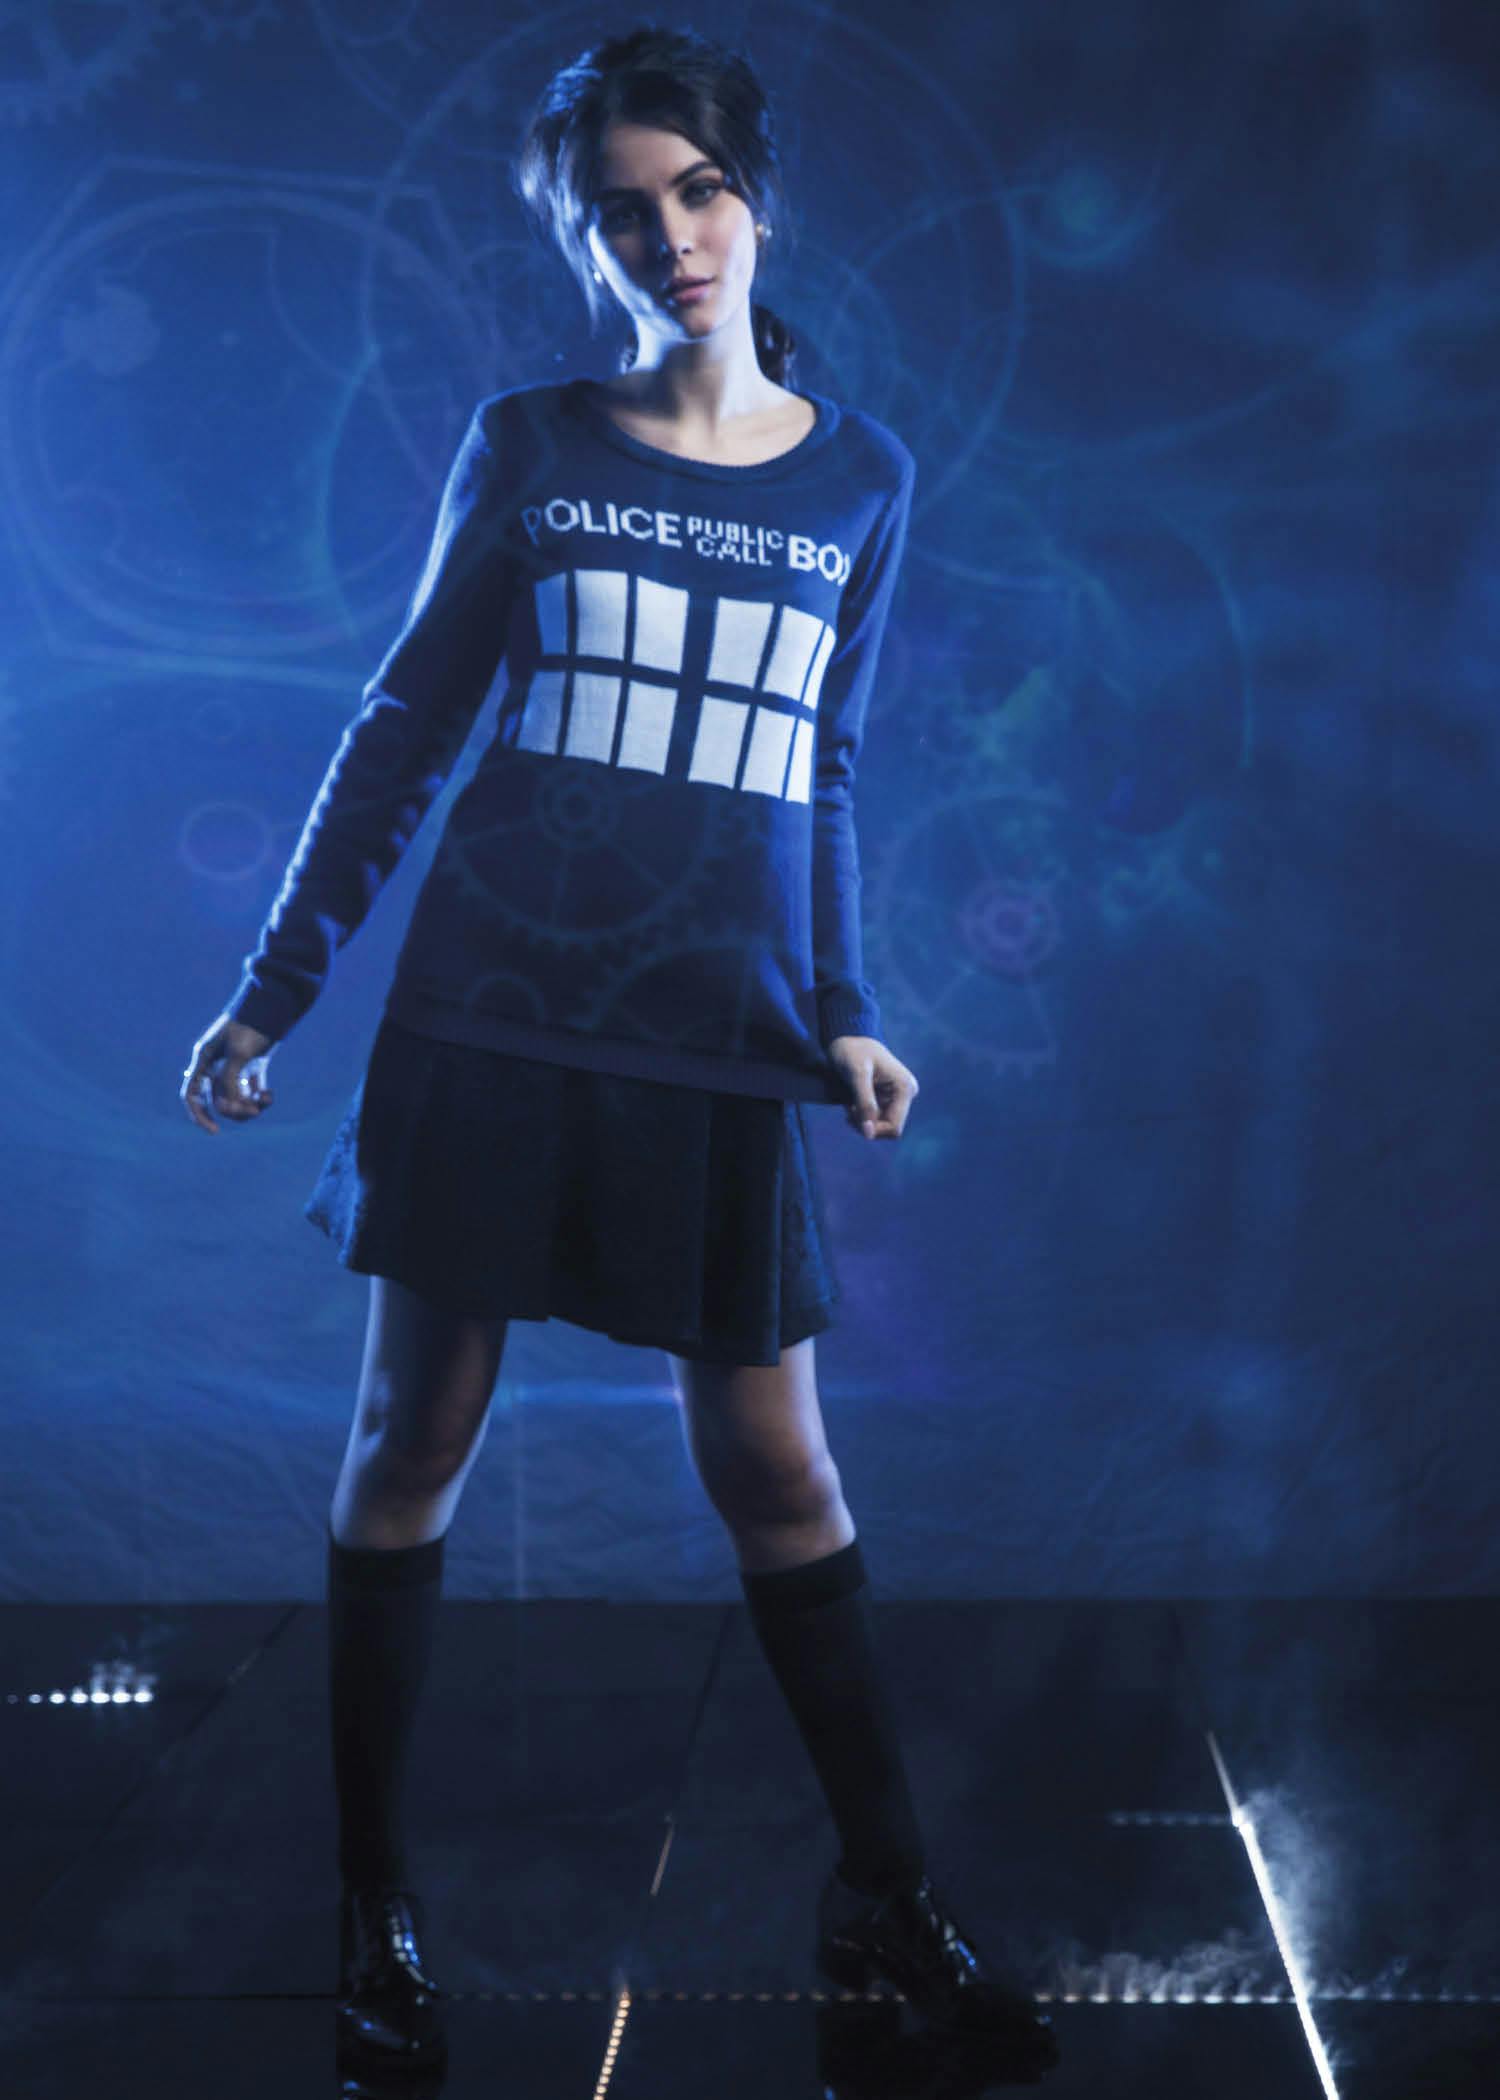 TARDIS Knit Pullover: $44.50 at all Hot Topic stores and HotTopic.com